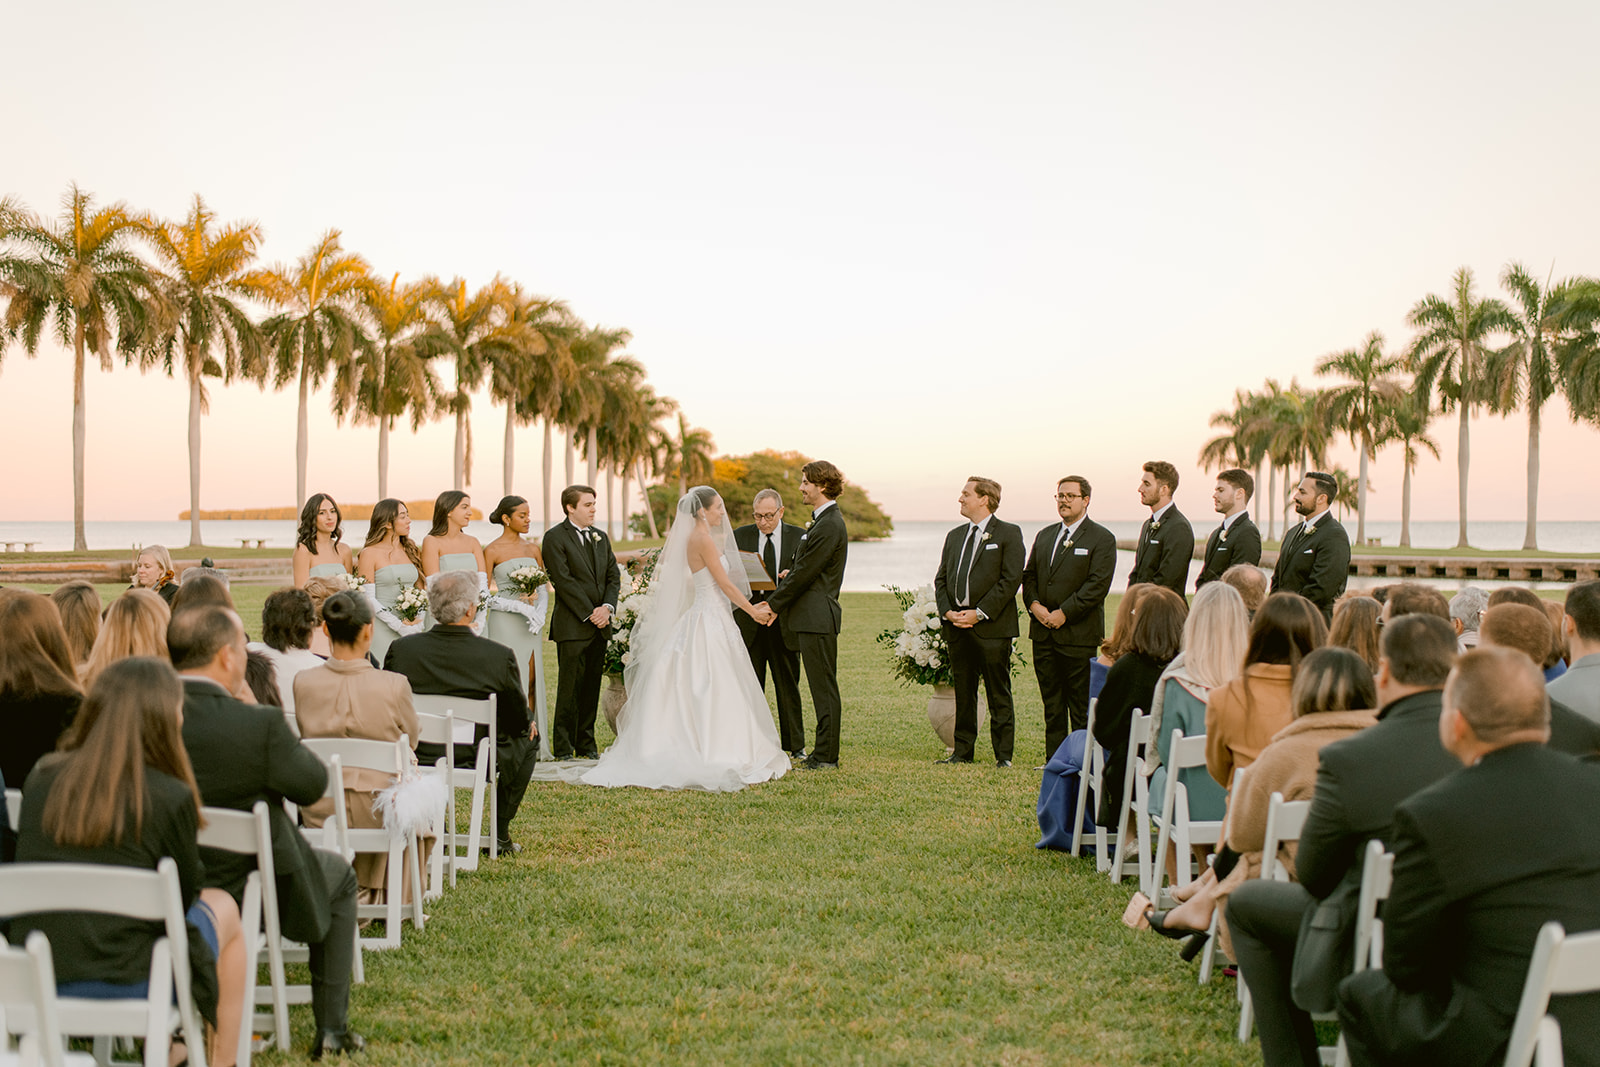 Unforgettable moments captured by Miami Florida's finest wedding photographer
